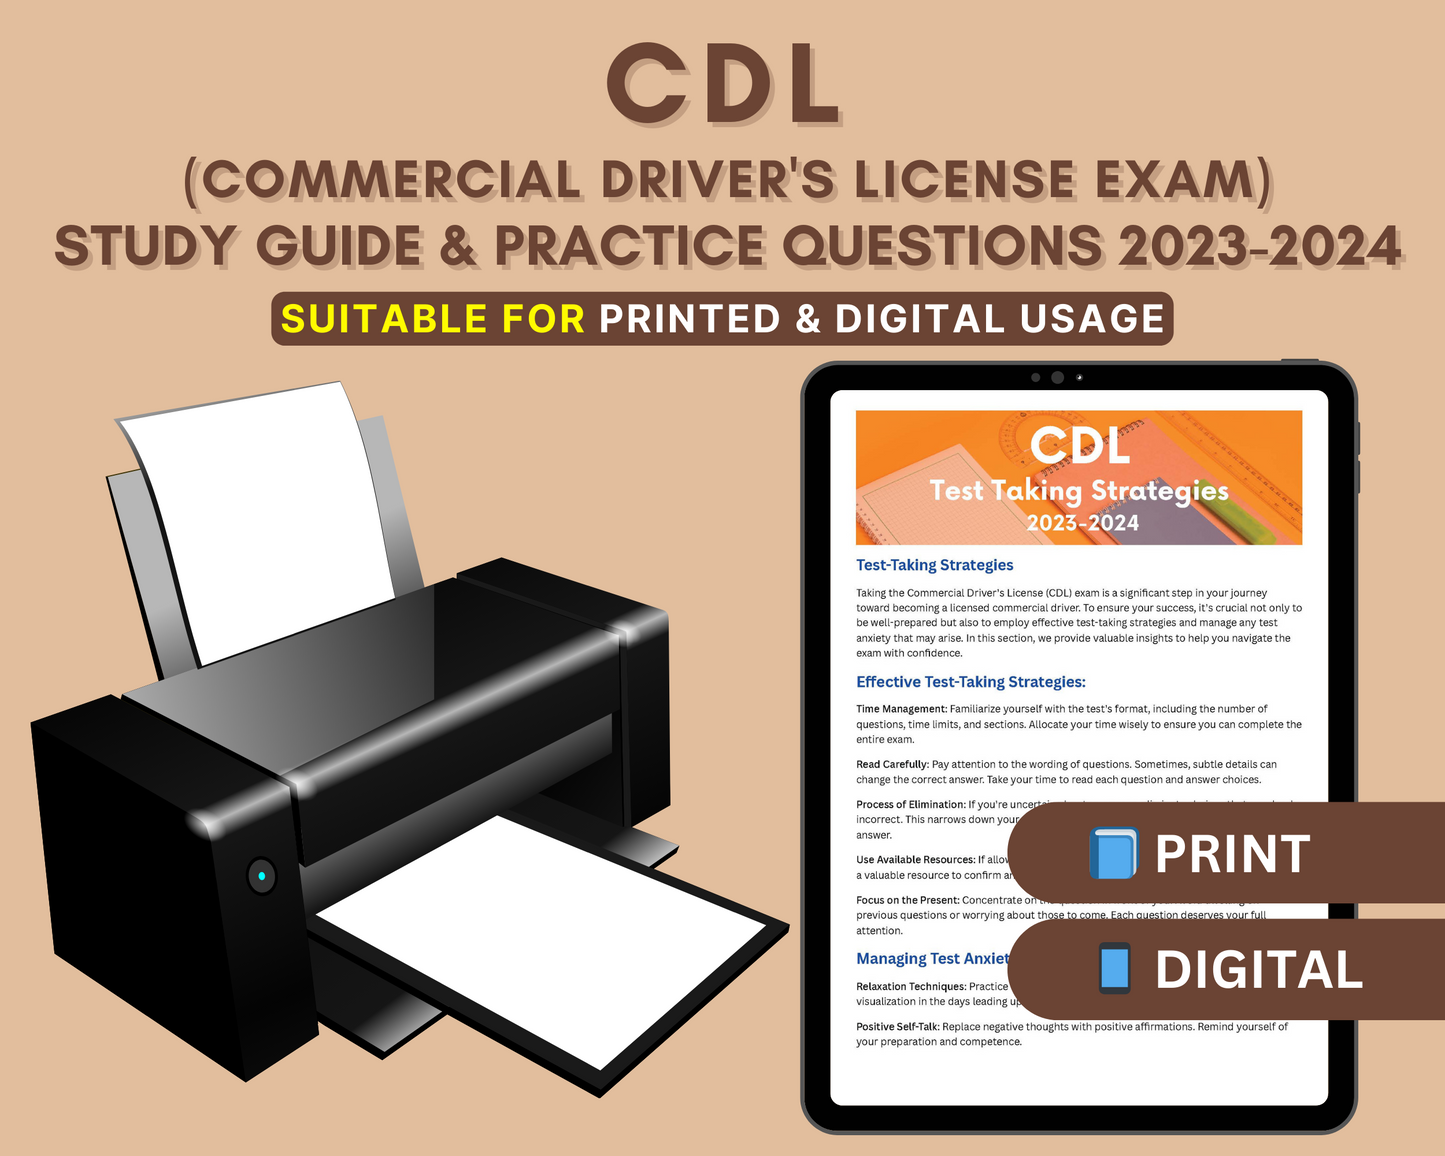 CDL Study Guide 2023-2024: Master the Commercial Driver's License Exam with In-Depth Content Review, and Practice Tests